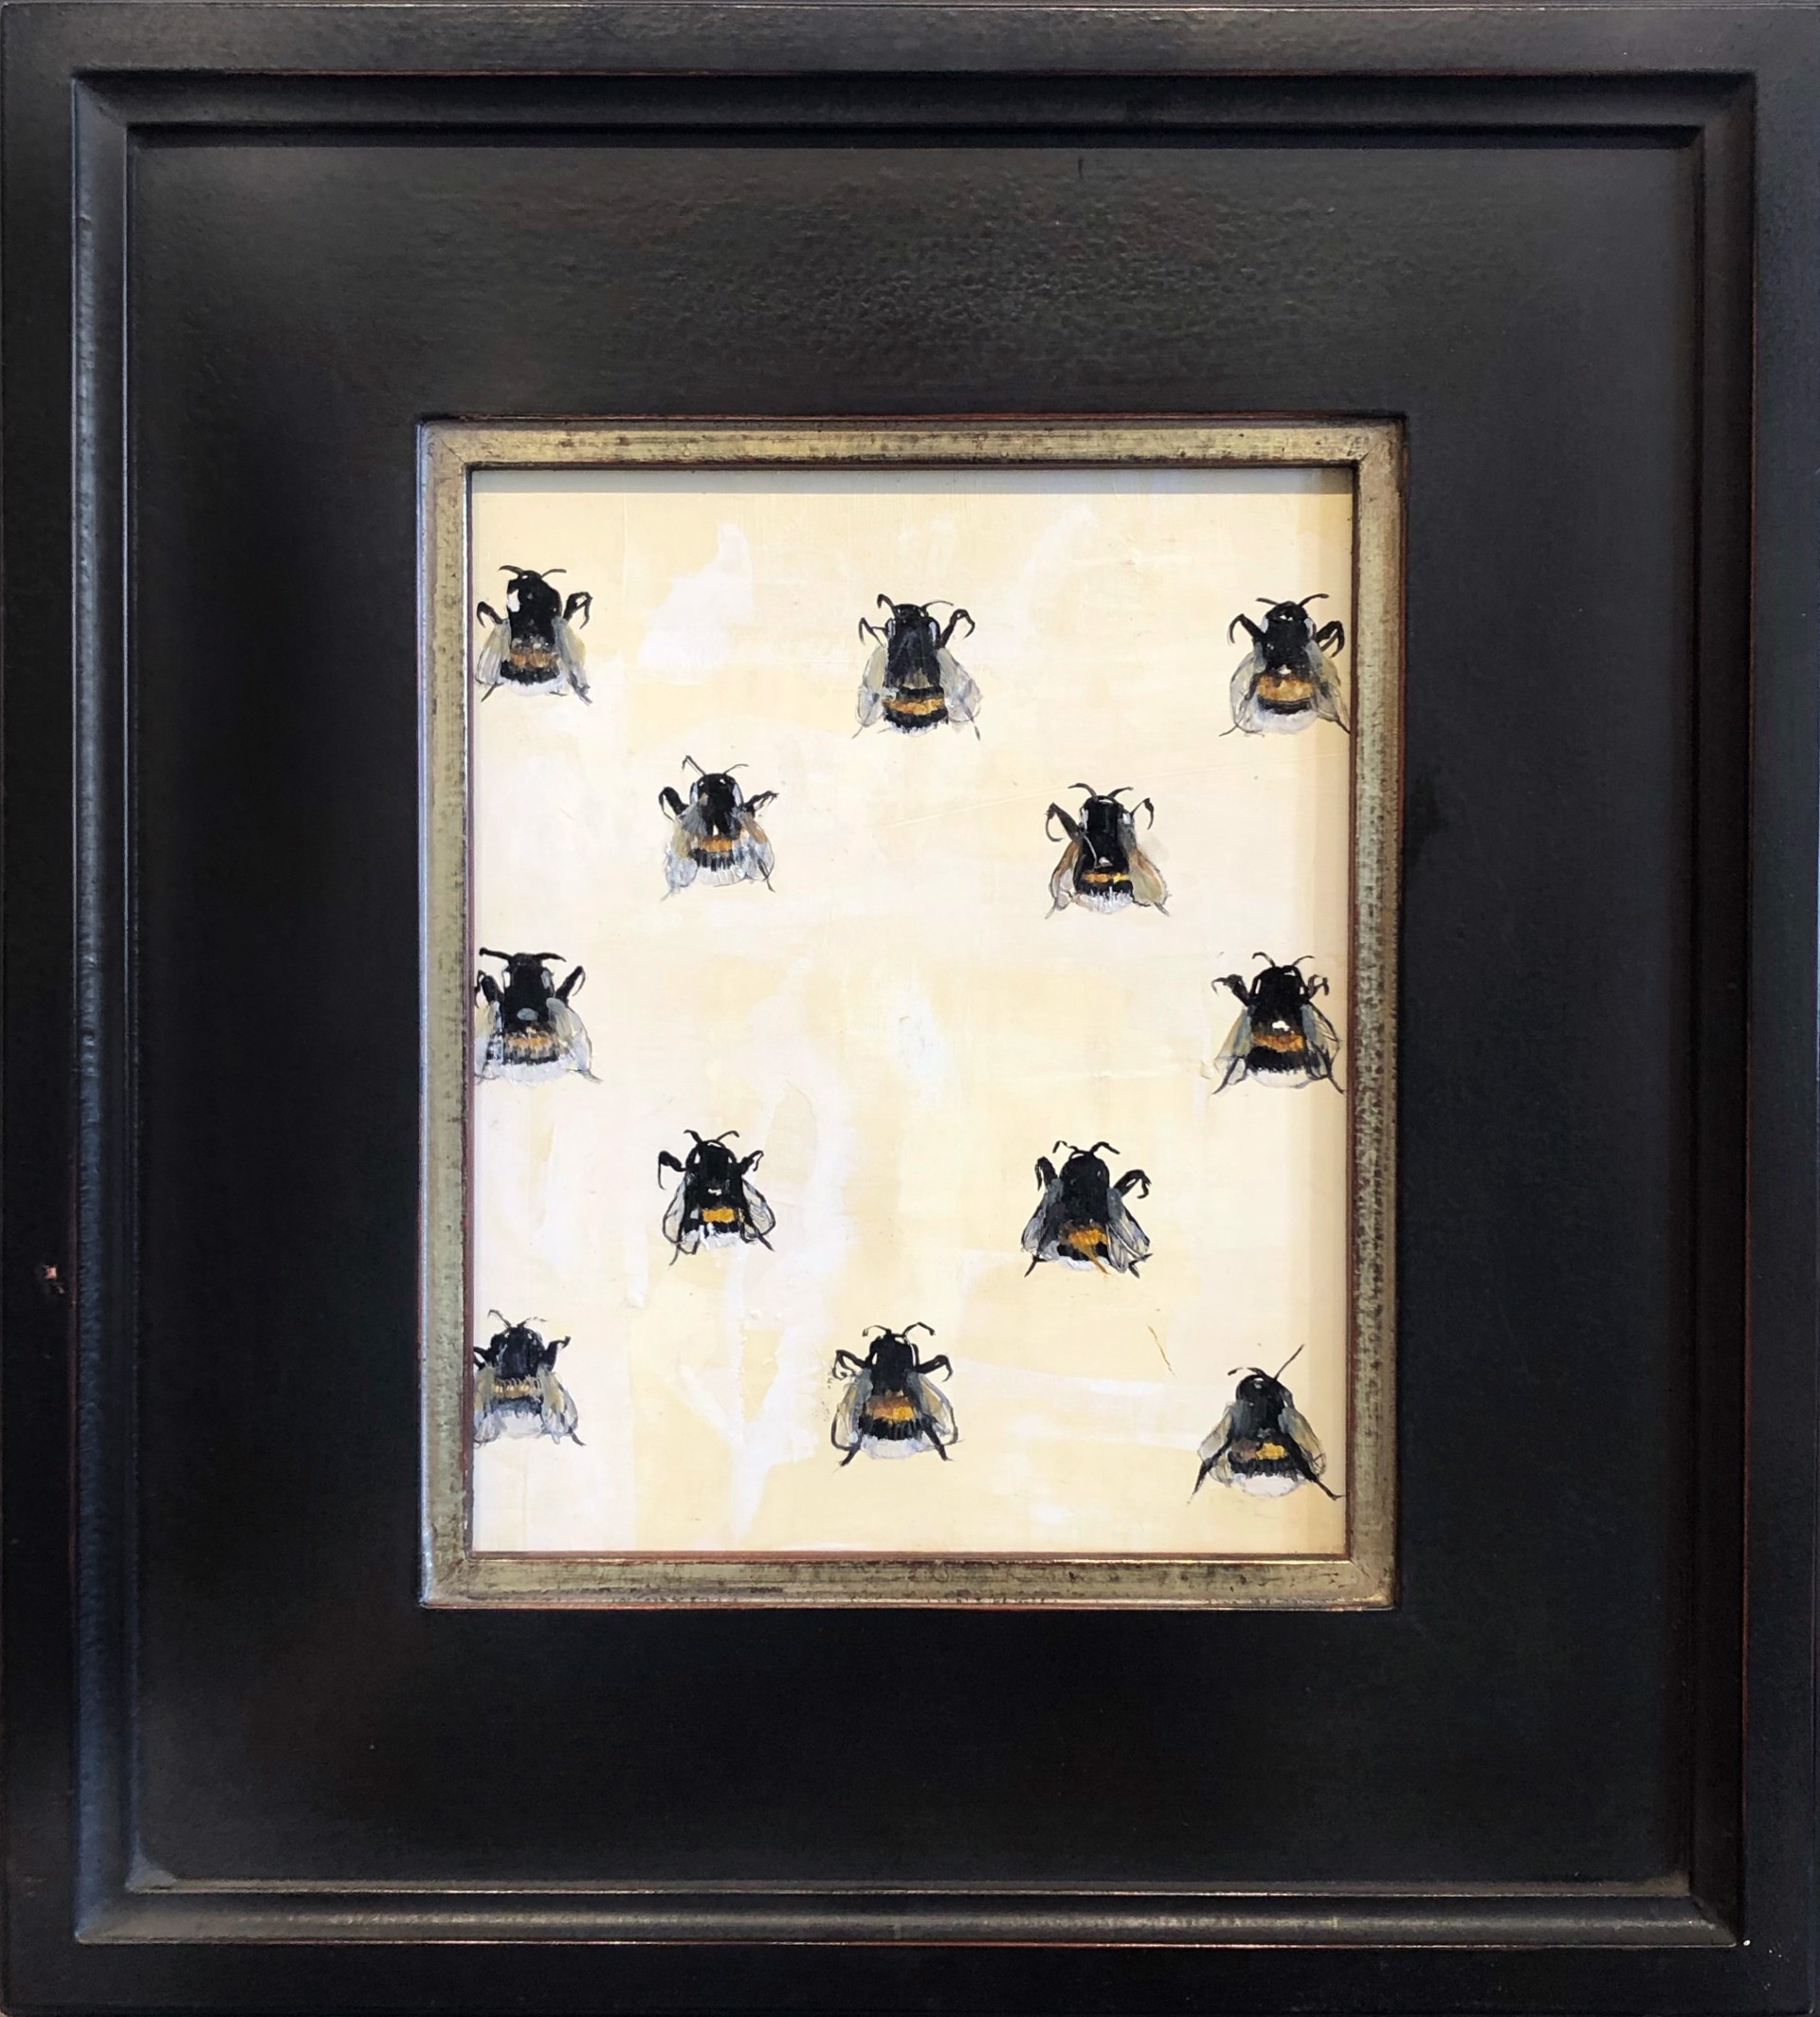 An Original Oil Painting Of Bees Arranged In A Pattern On A Warm Cream Contemporary Background, By Jenna Von Benedikt